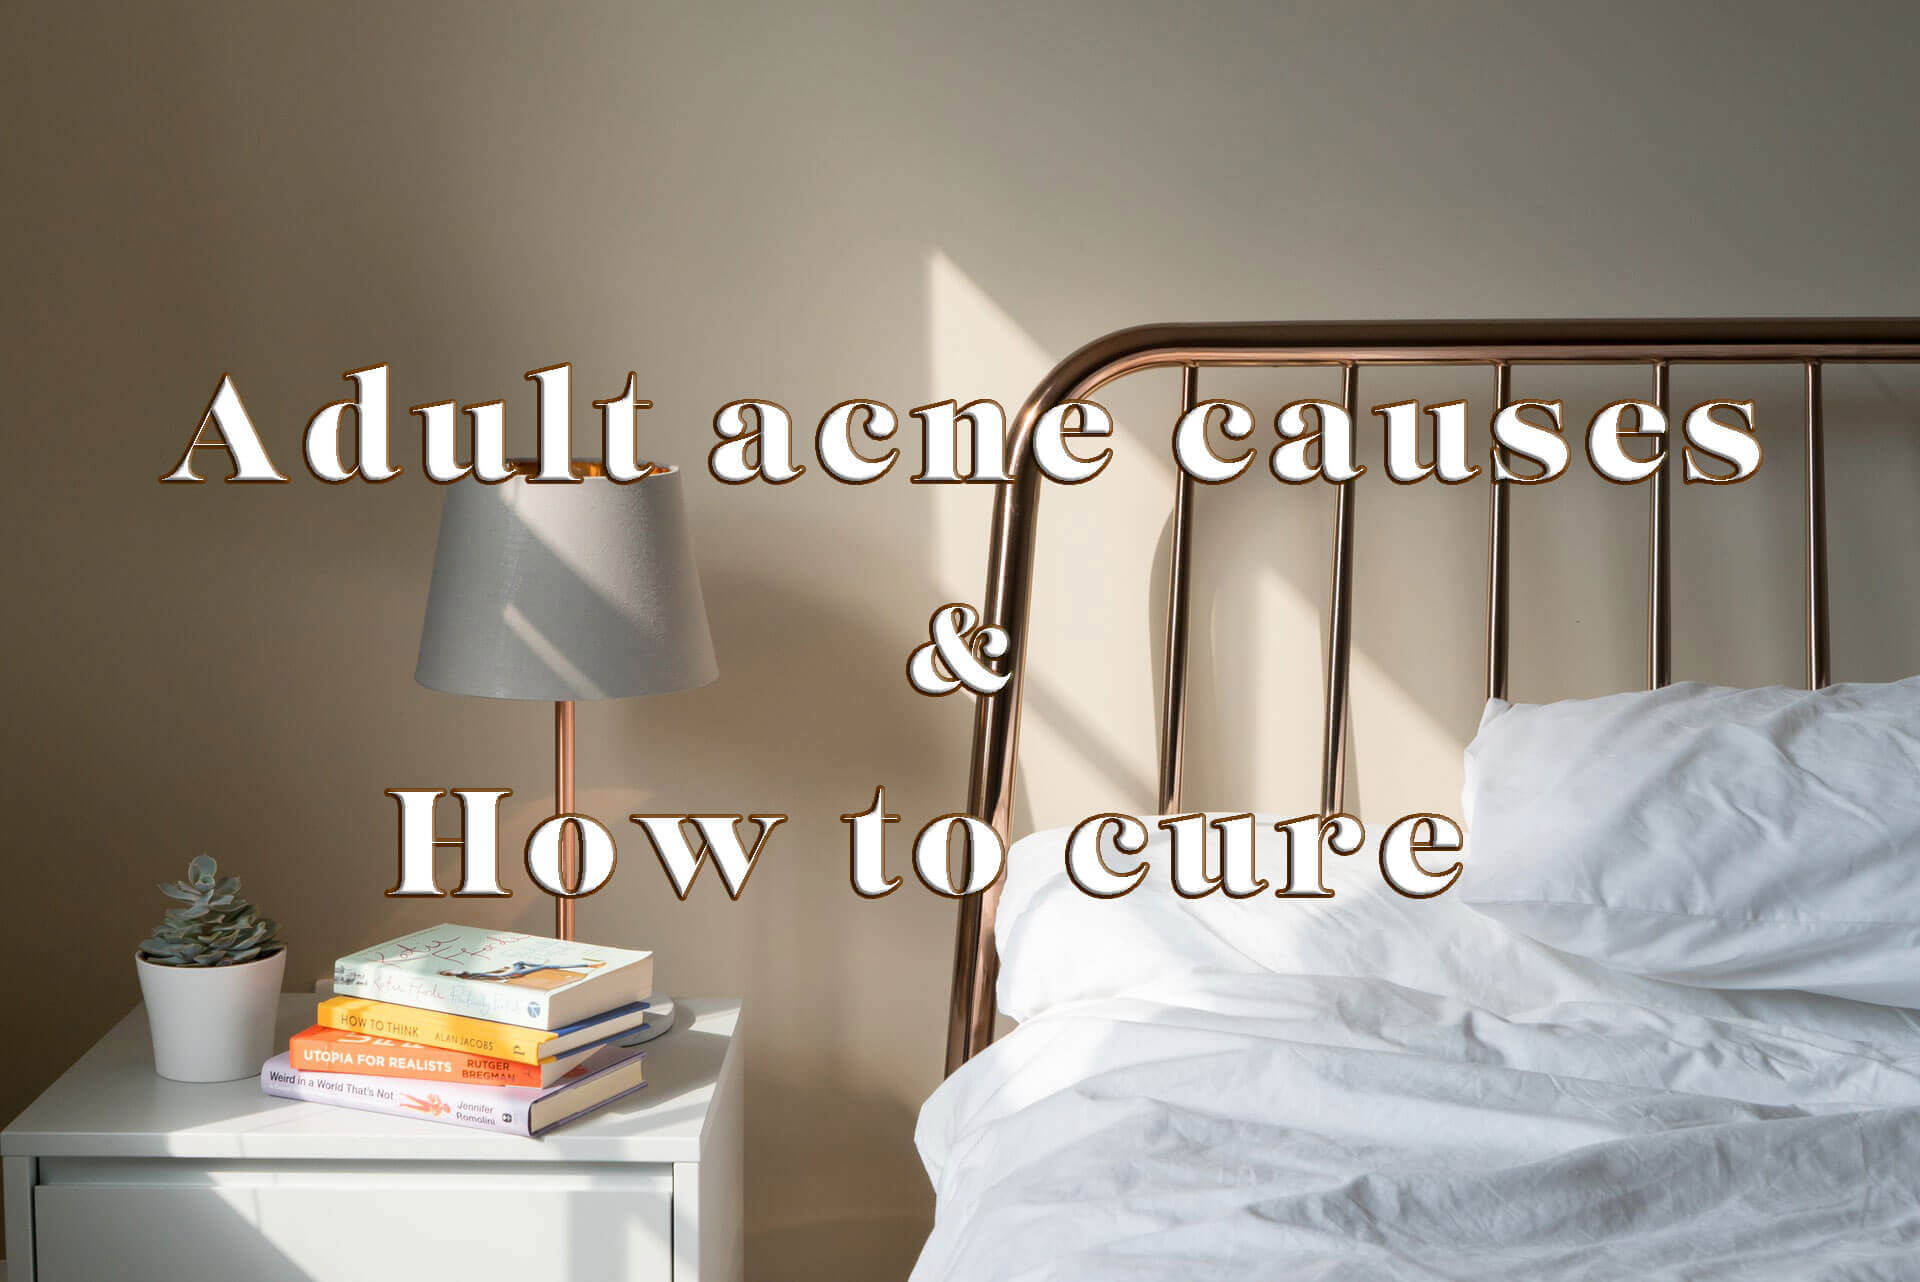 Adult acne causes and how to cure